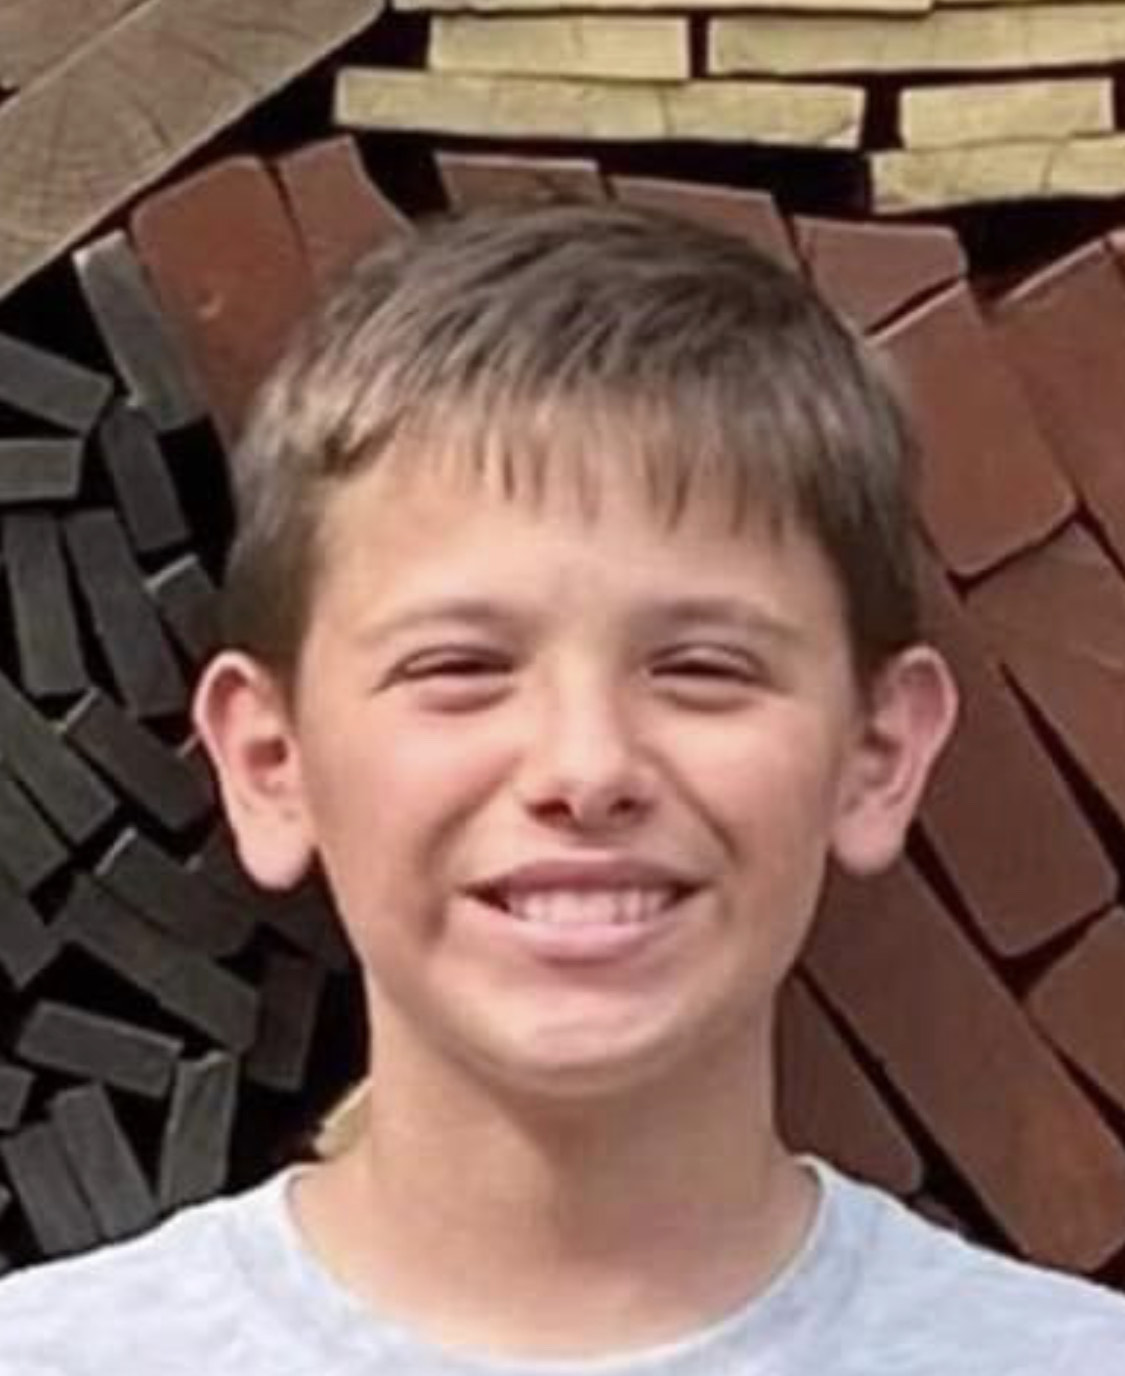 Search for missing boy underway in Mingo County